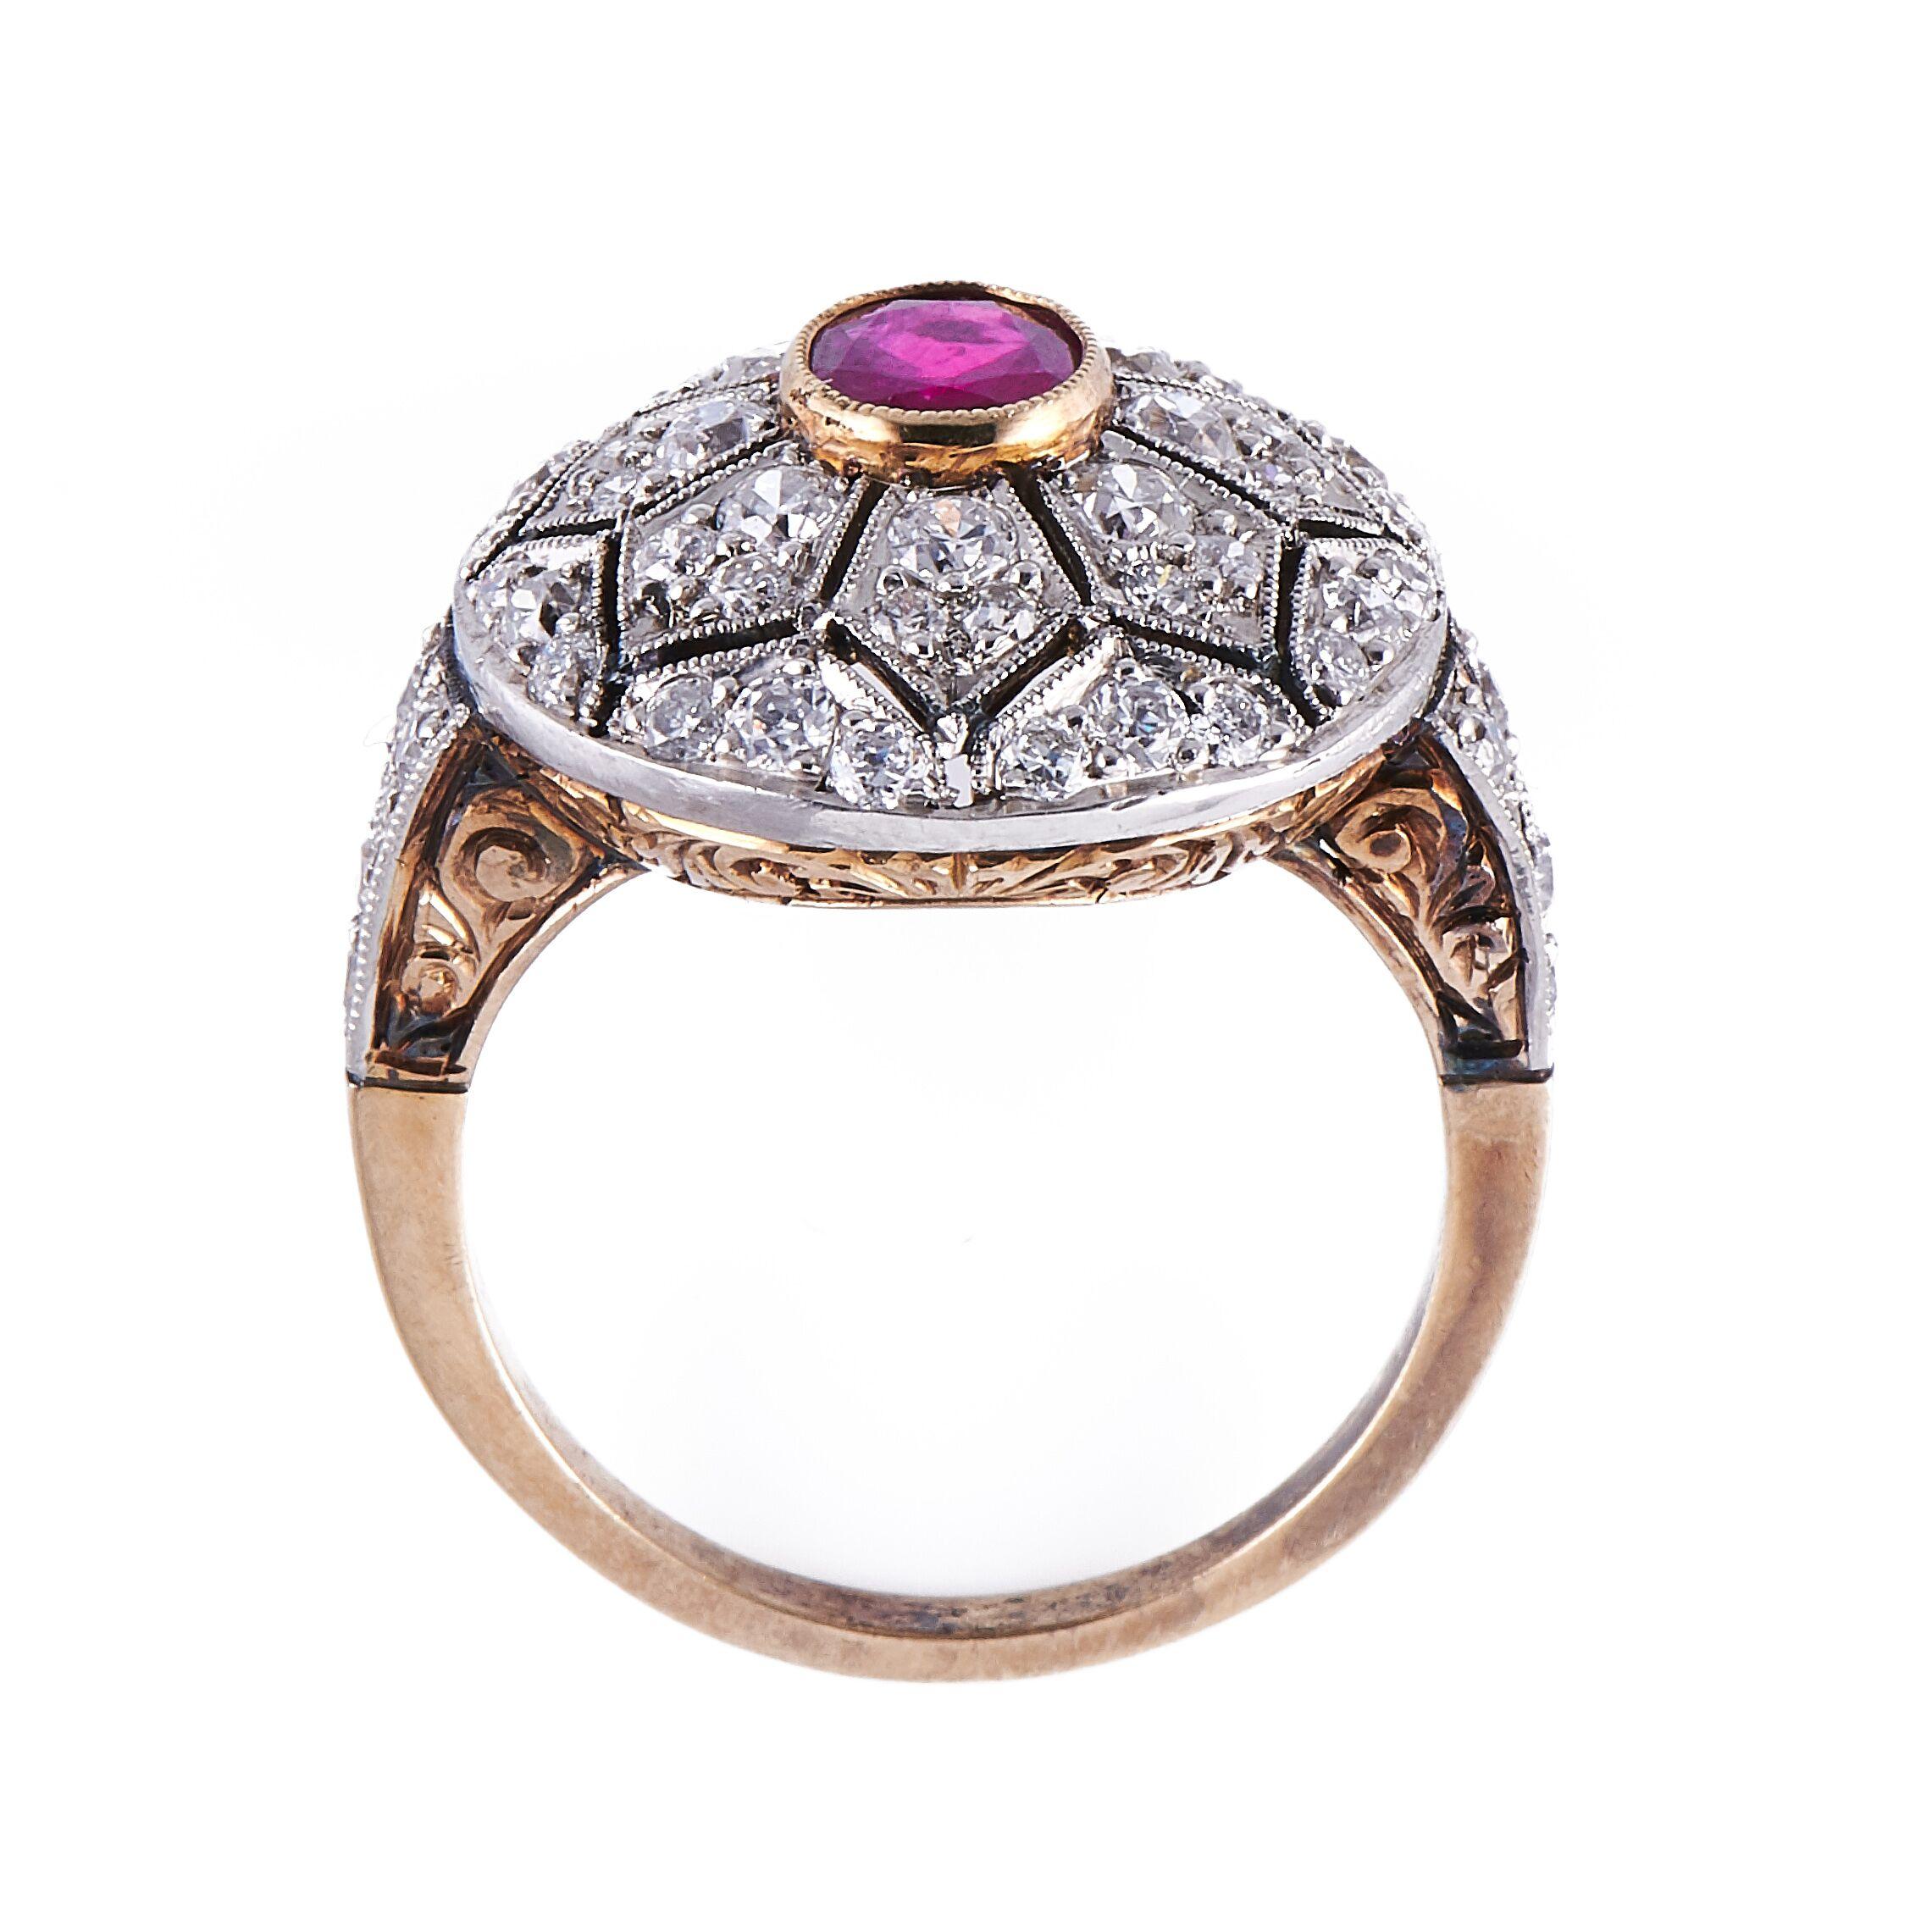 Women's Antique, Belle Époque, 18 Carat Gold, Ruby and Diamond Cluster Ring